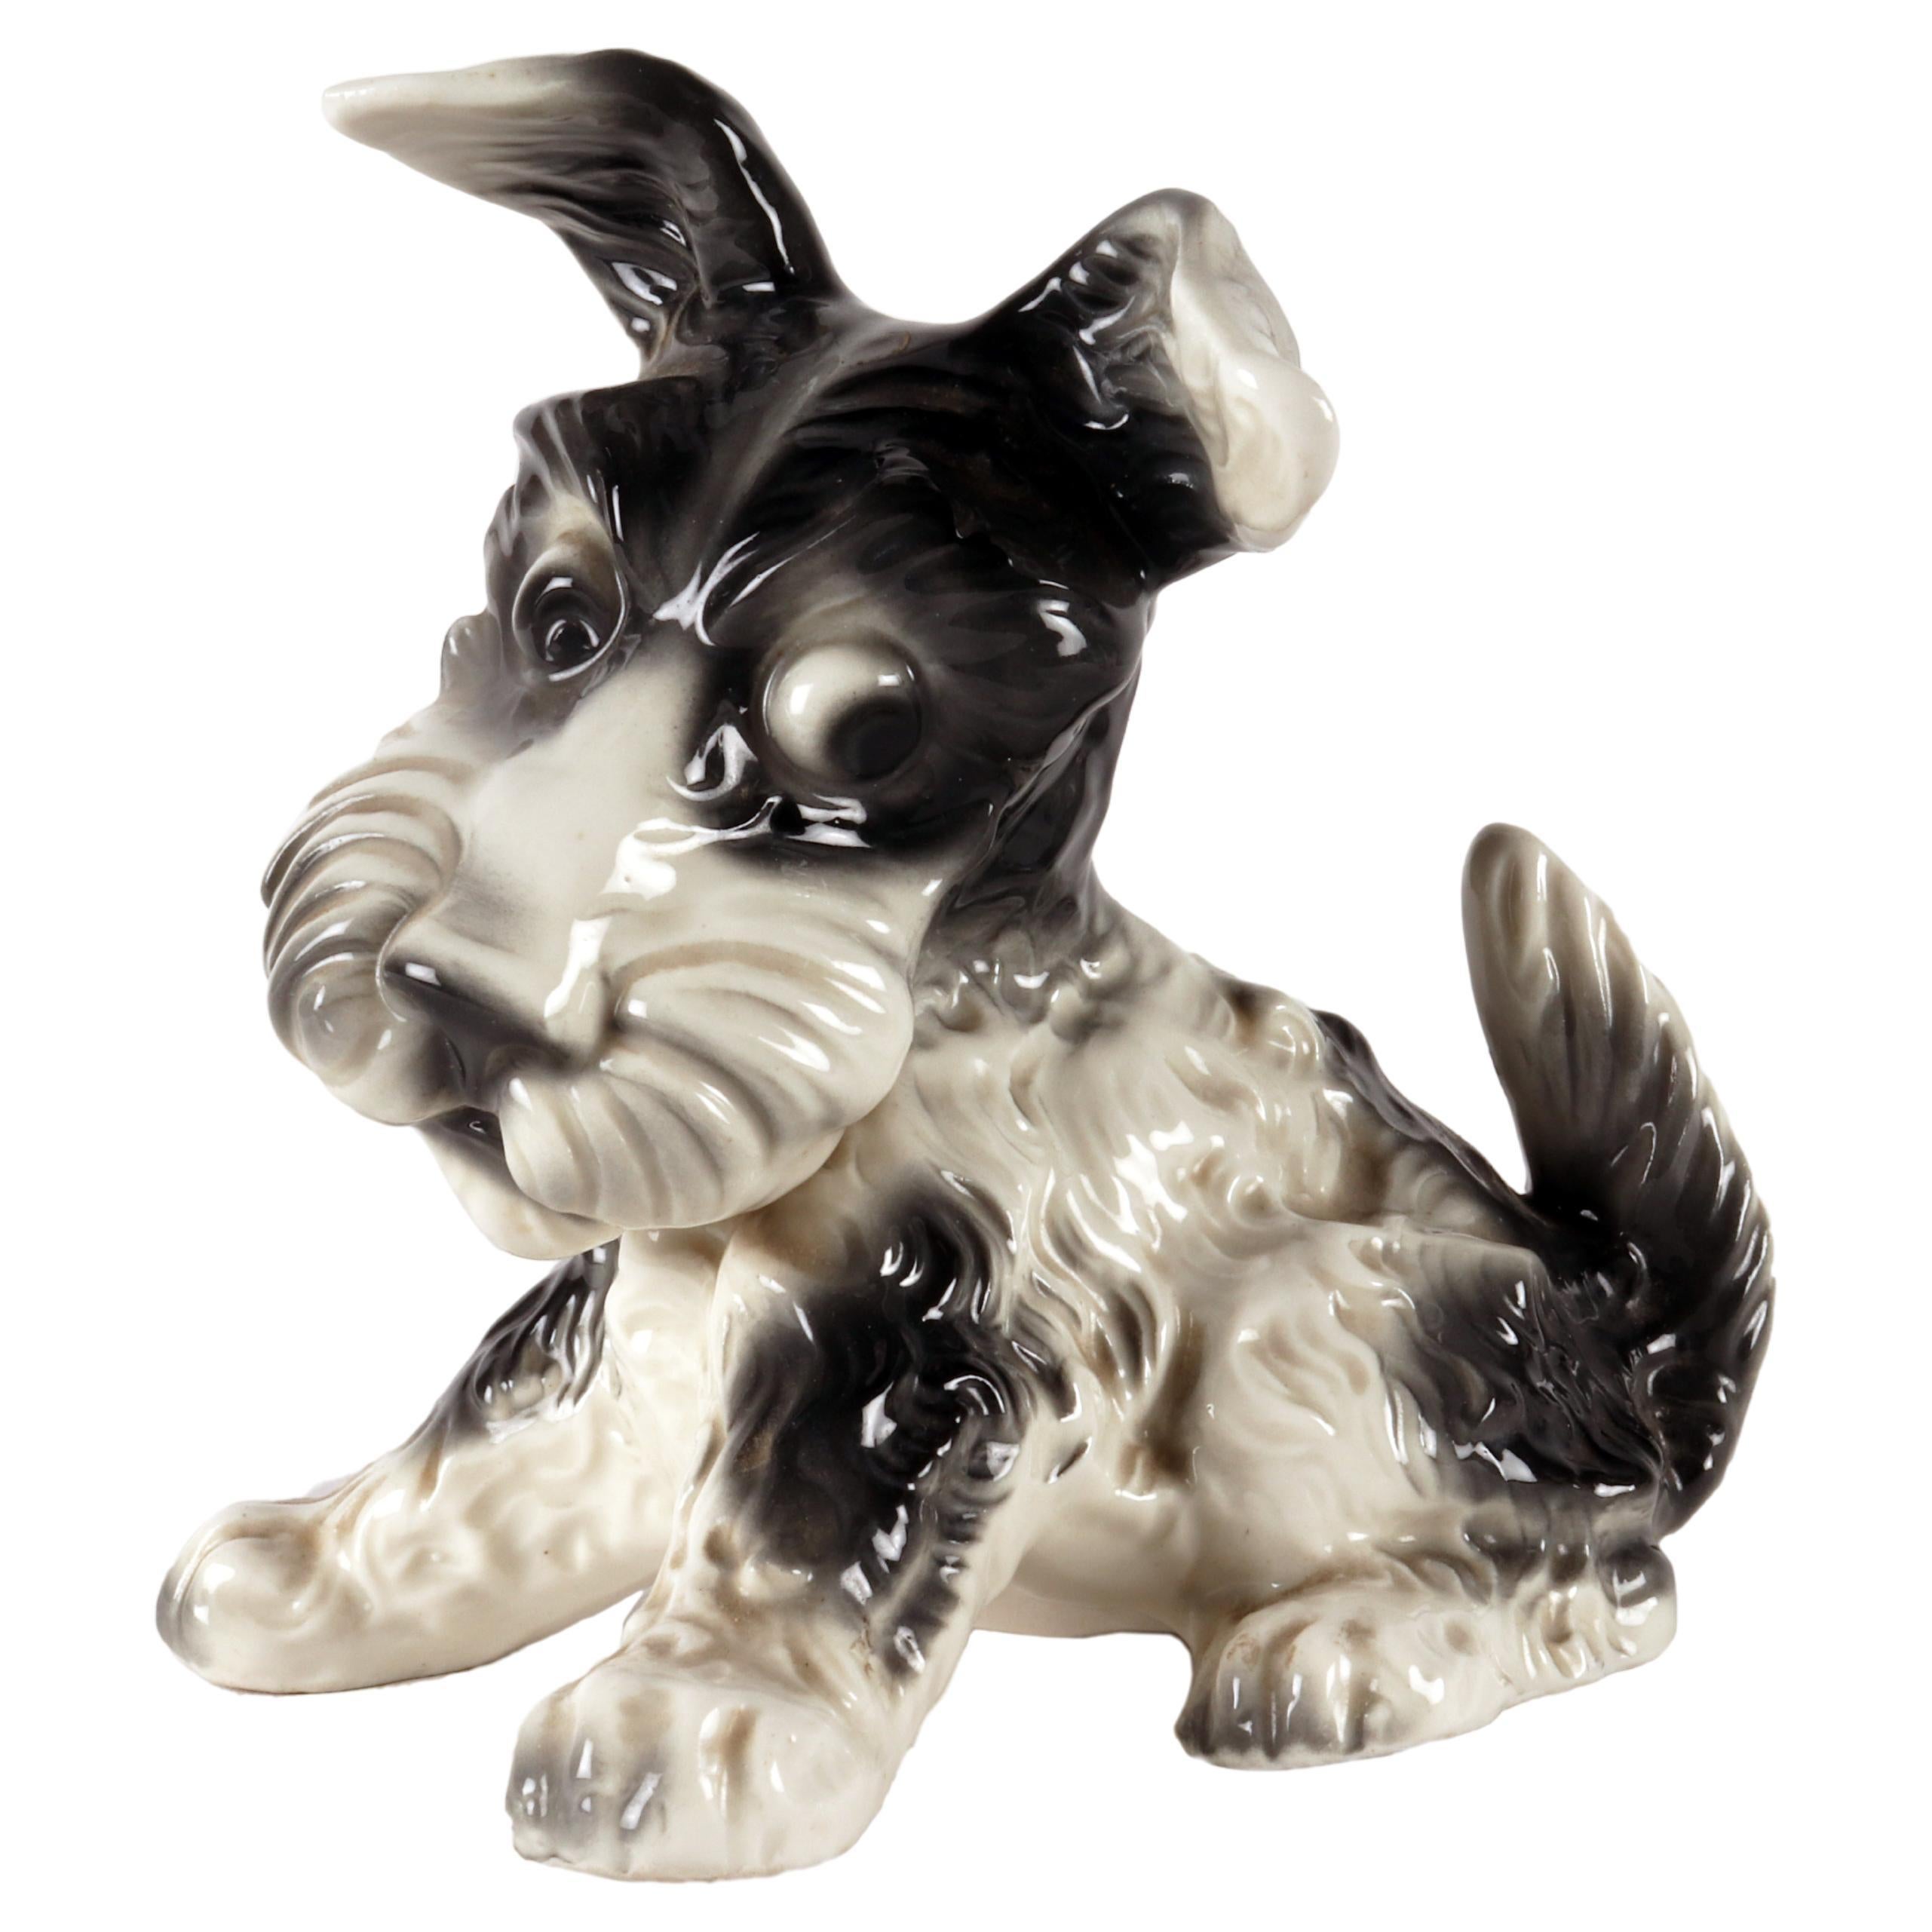 Porcelain sculpture of a Terrier dog, England Thuringia, Germany, 1940 - 1950. For Sale